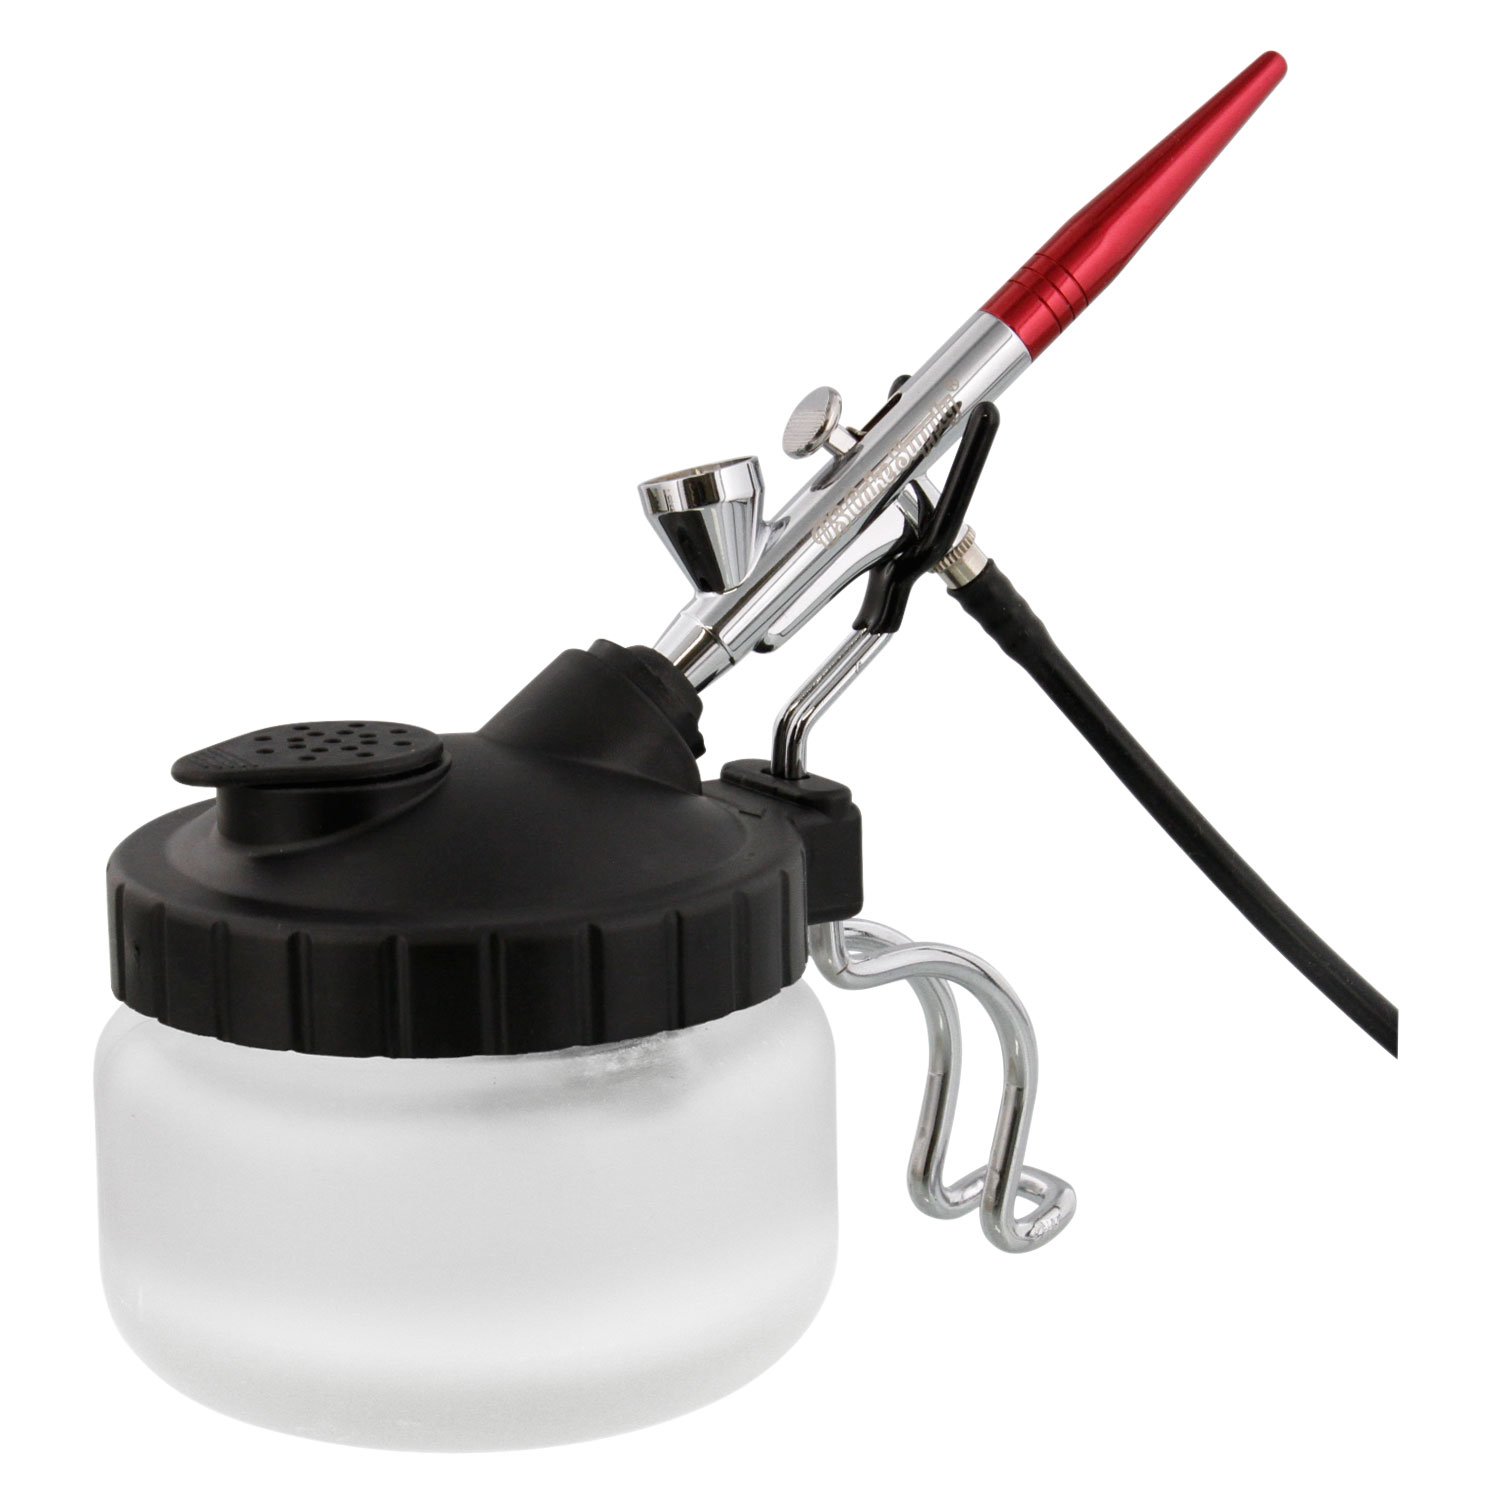 Master Airbrush Deluxe Airbrush 3 in 1 Cleaning Pot with Holder; Cleans  Airbrush, Holds Airbrush, Color Palette Lid, Filters : Amazon.sg: Toys